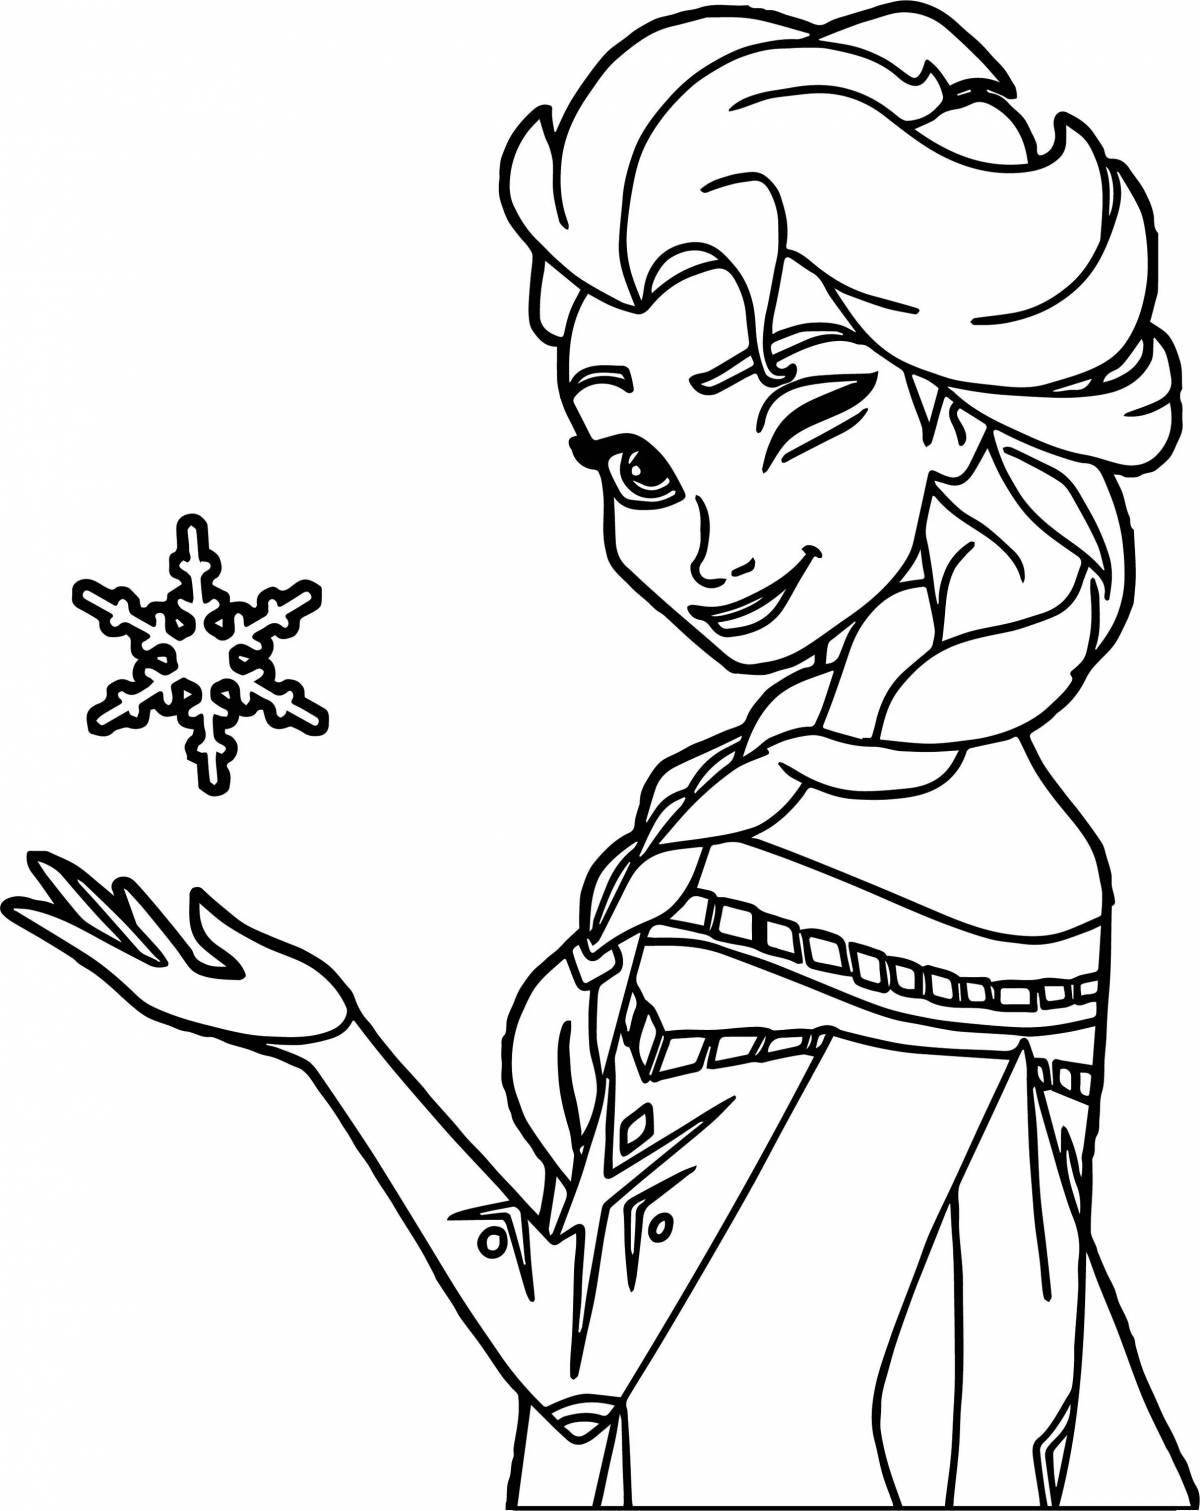 Elsa serene coloring book for kids 6-7 years old